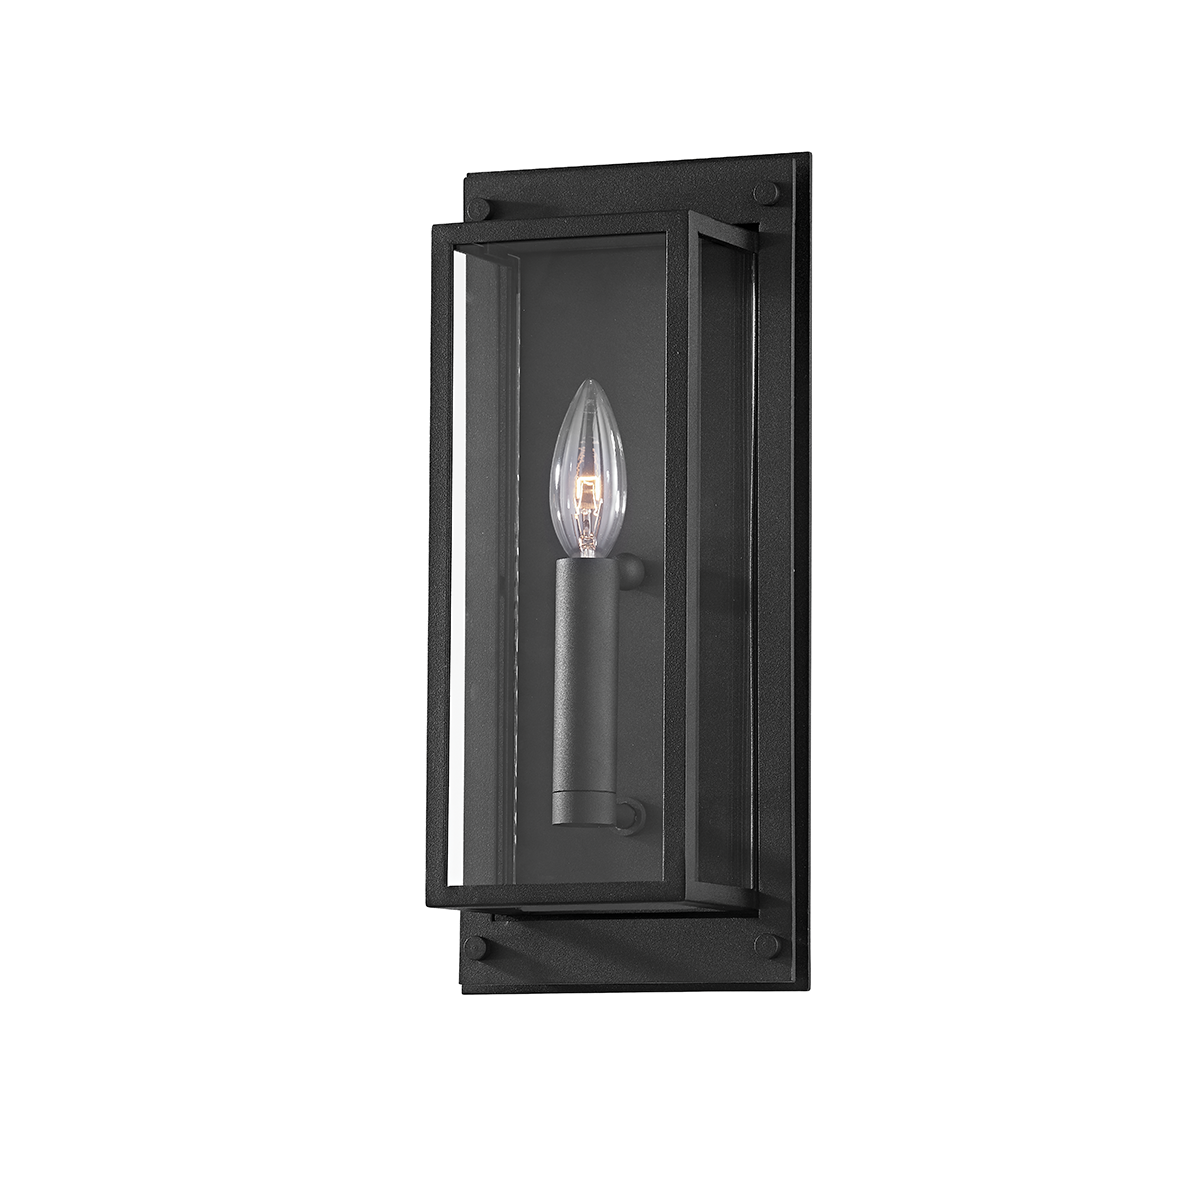 Troy WINSLOW 1 LIGHT SMALL EXTERIOR WALL SCONCE B9101 Outdoor l Wall Troy Lighting TEXTURE BLACK  